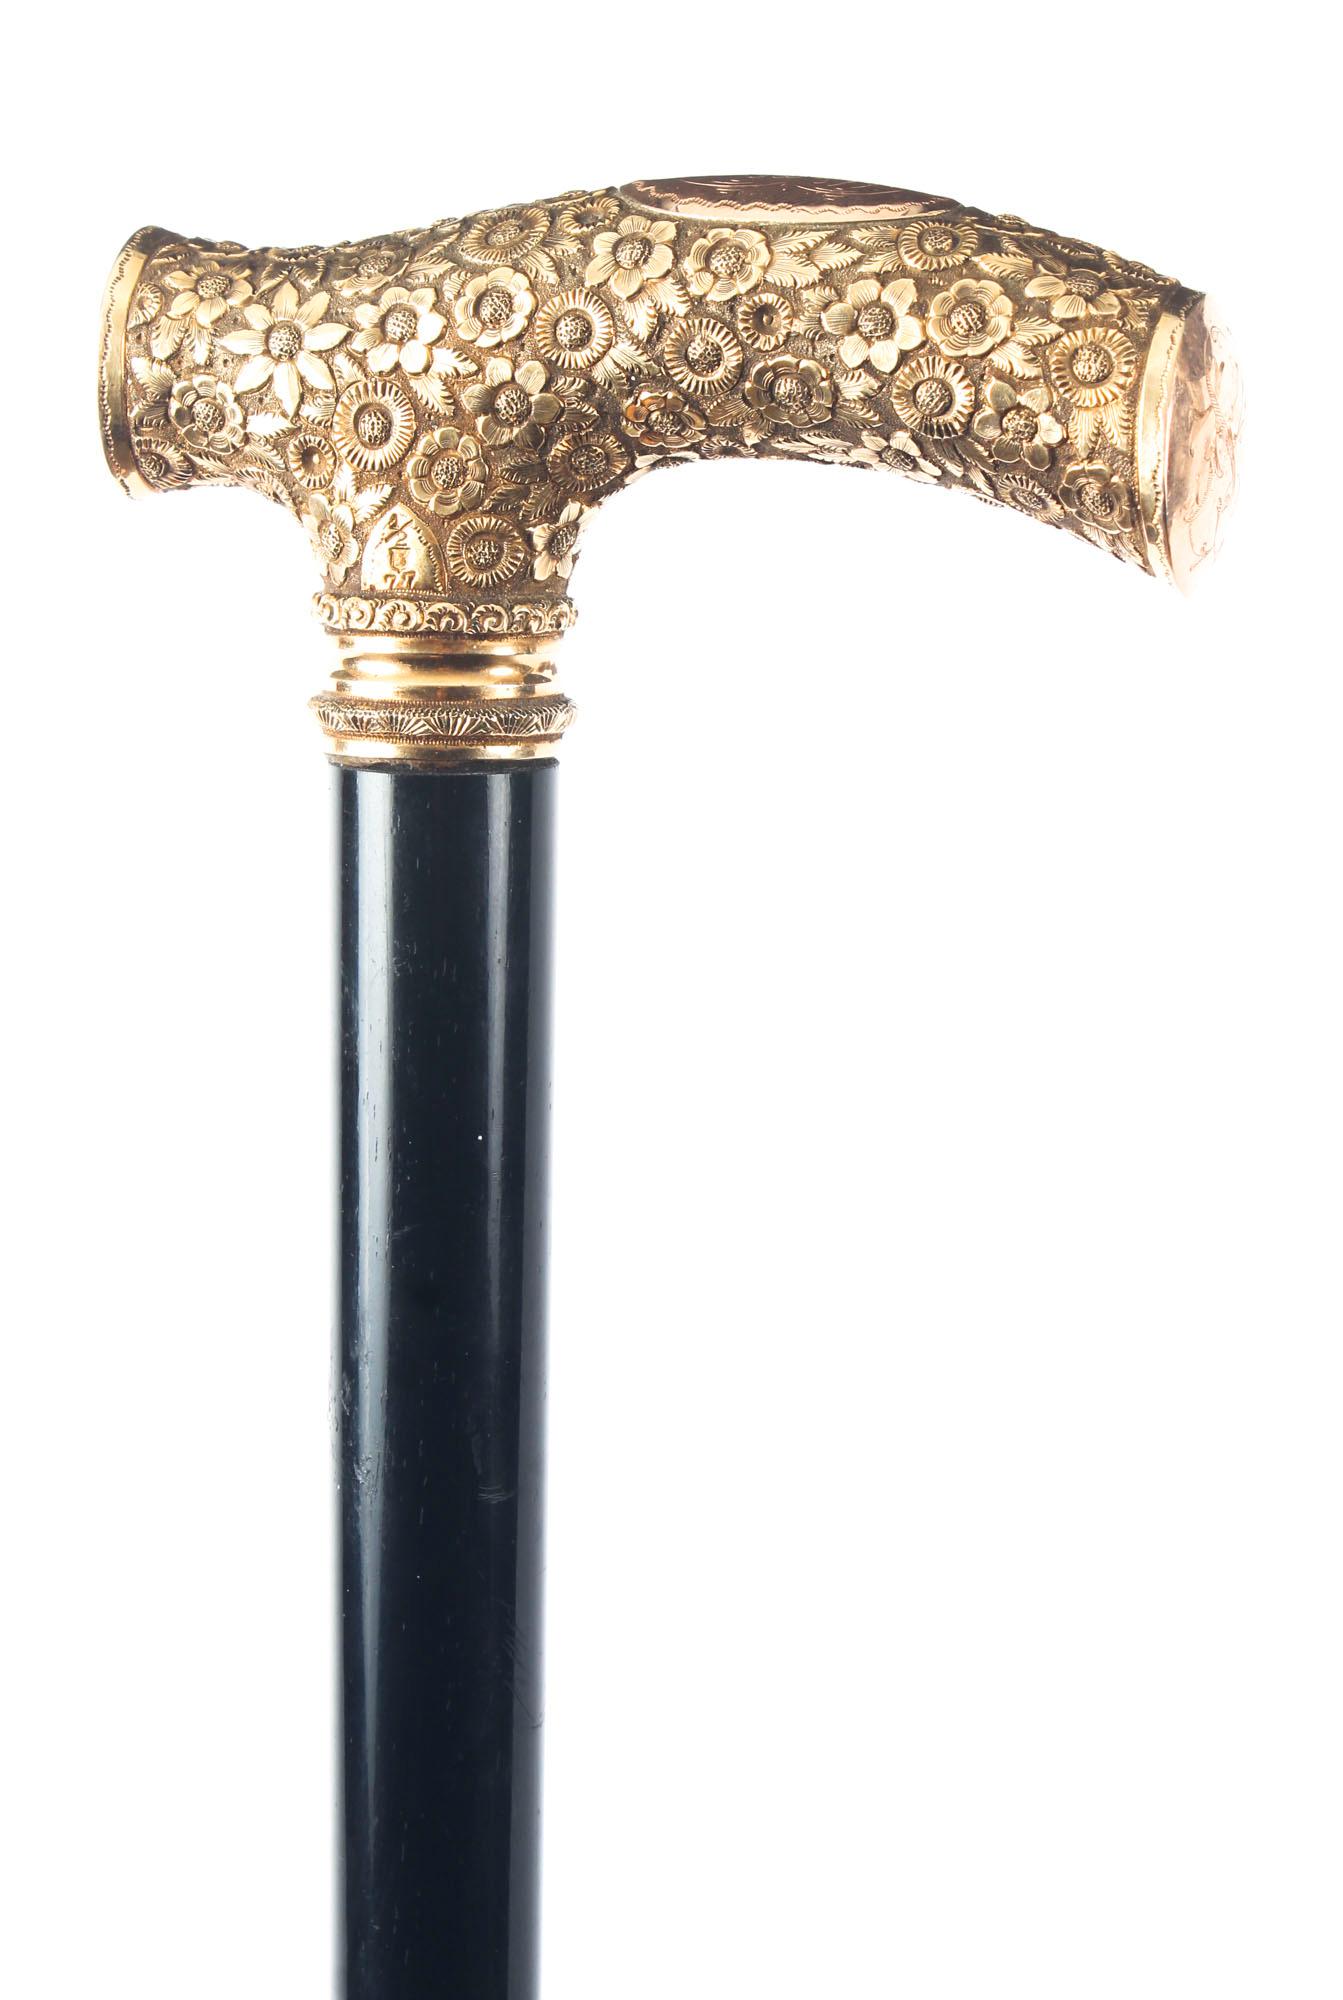 Antique French Gold-Plated Lacquered Walking Stick Cane, 19th Century 5